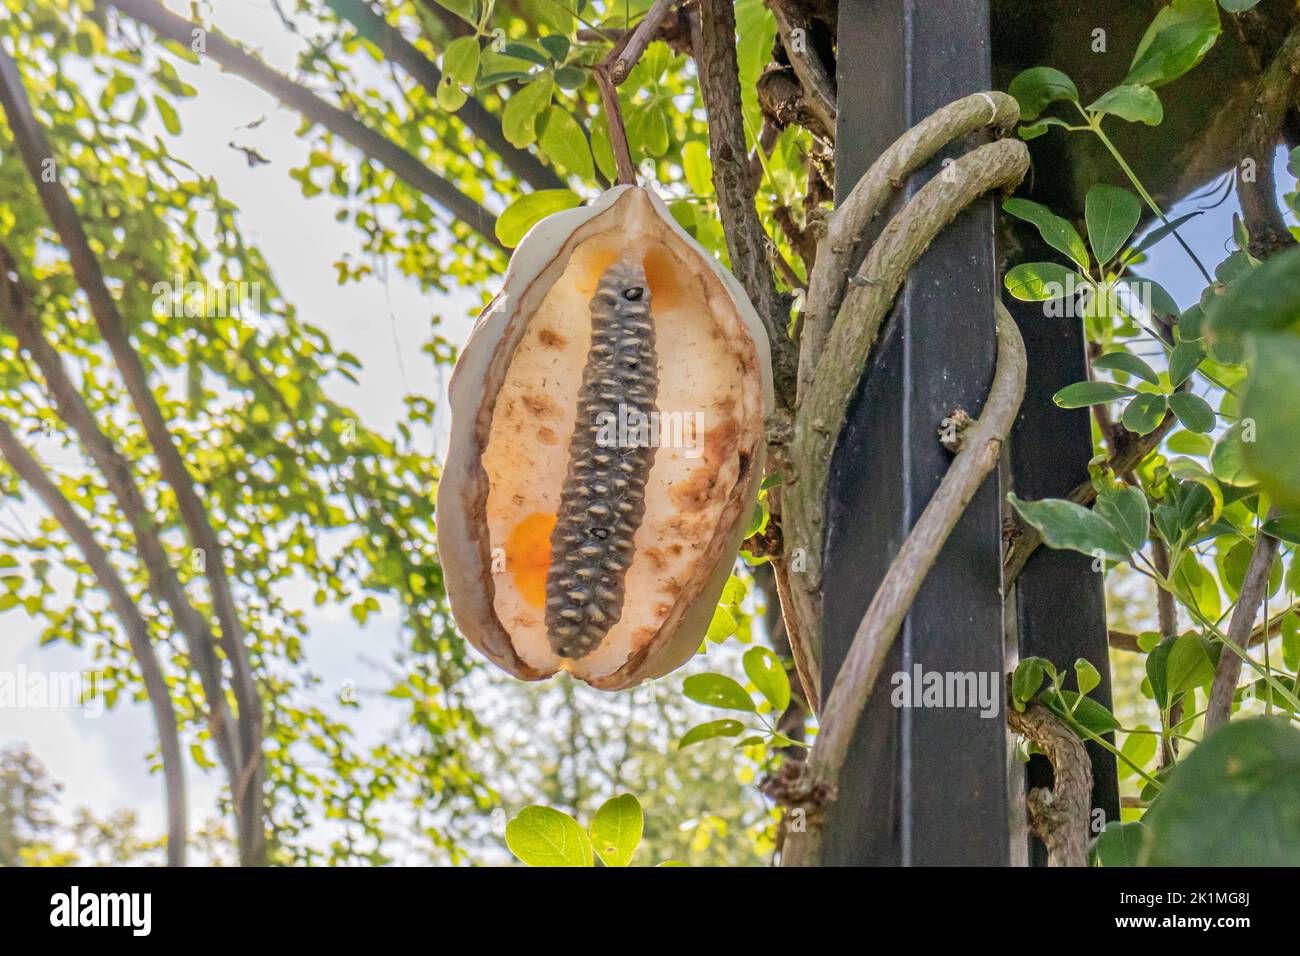 Fruit in an elongated pod with its seeds of a climbing plant Akebia quinata or Chocolate Vine against green foliage, sunny summer day, black metal pos Stock Photo